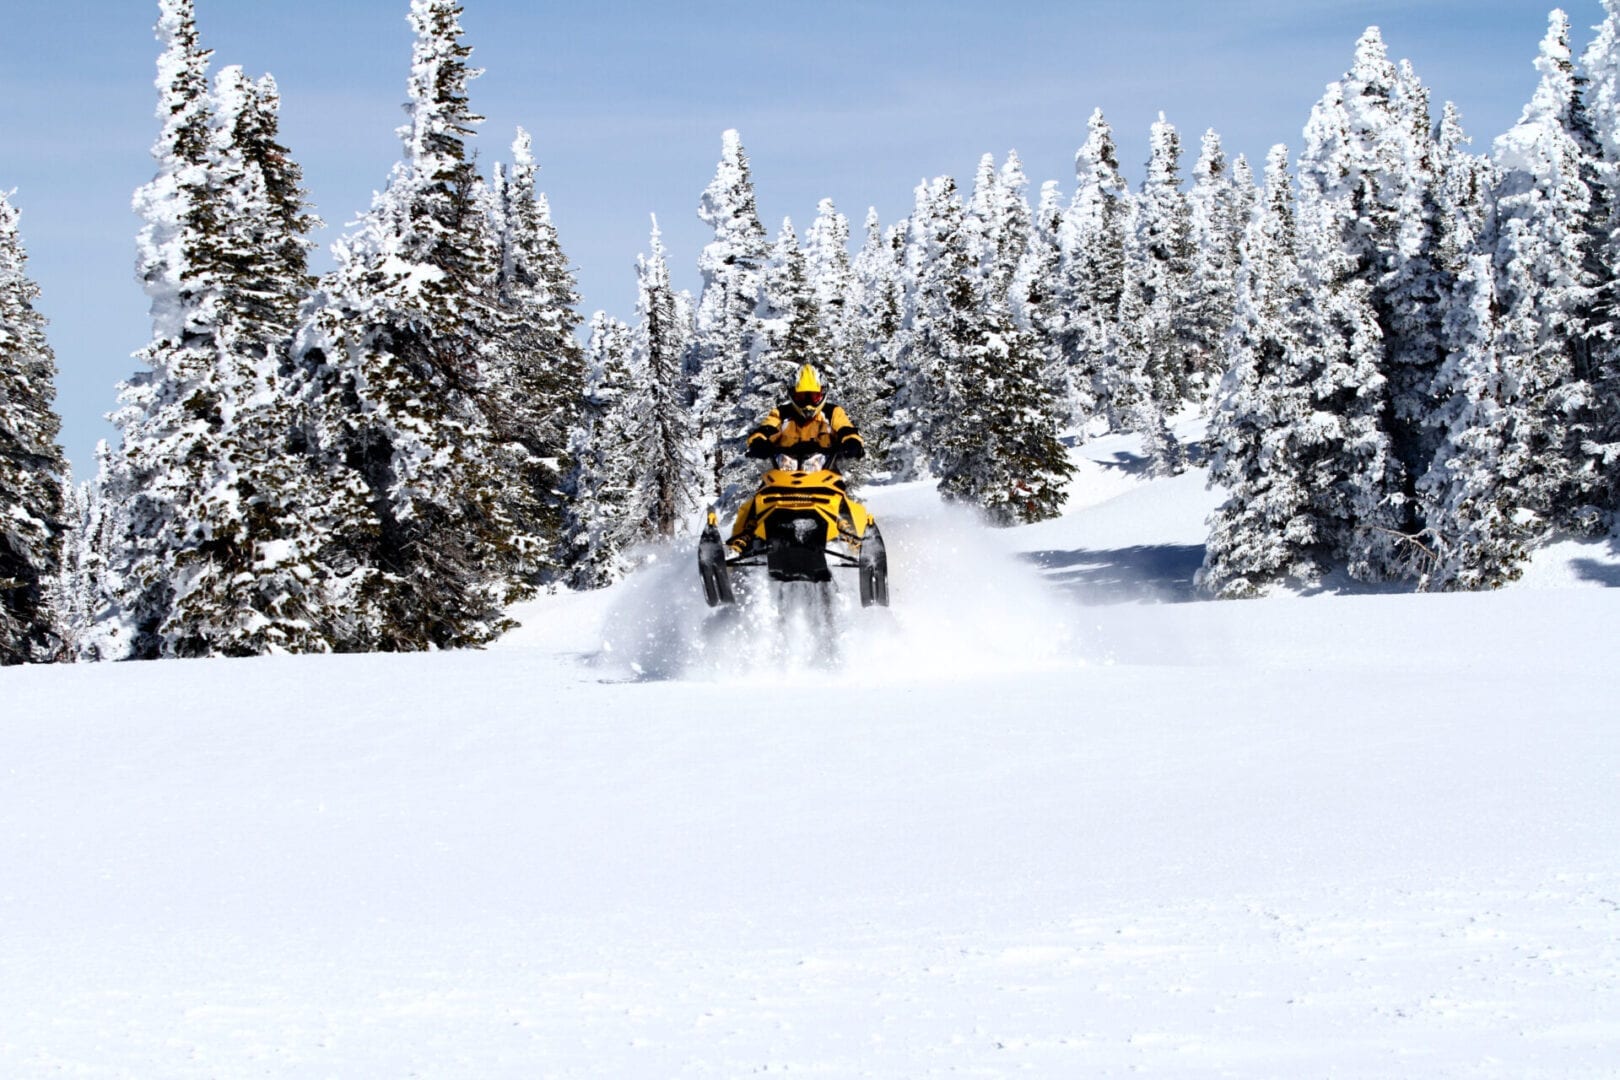 Snowmoblier coming out of the trees in deep powder snow using AMSOIL